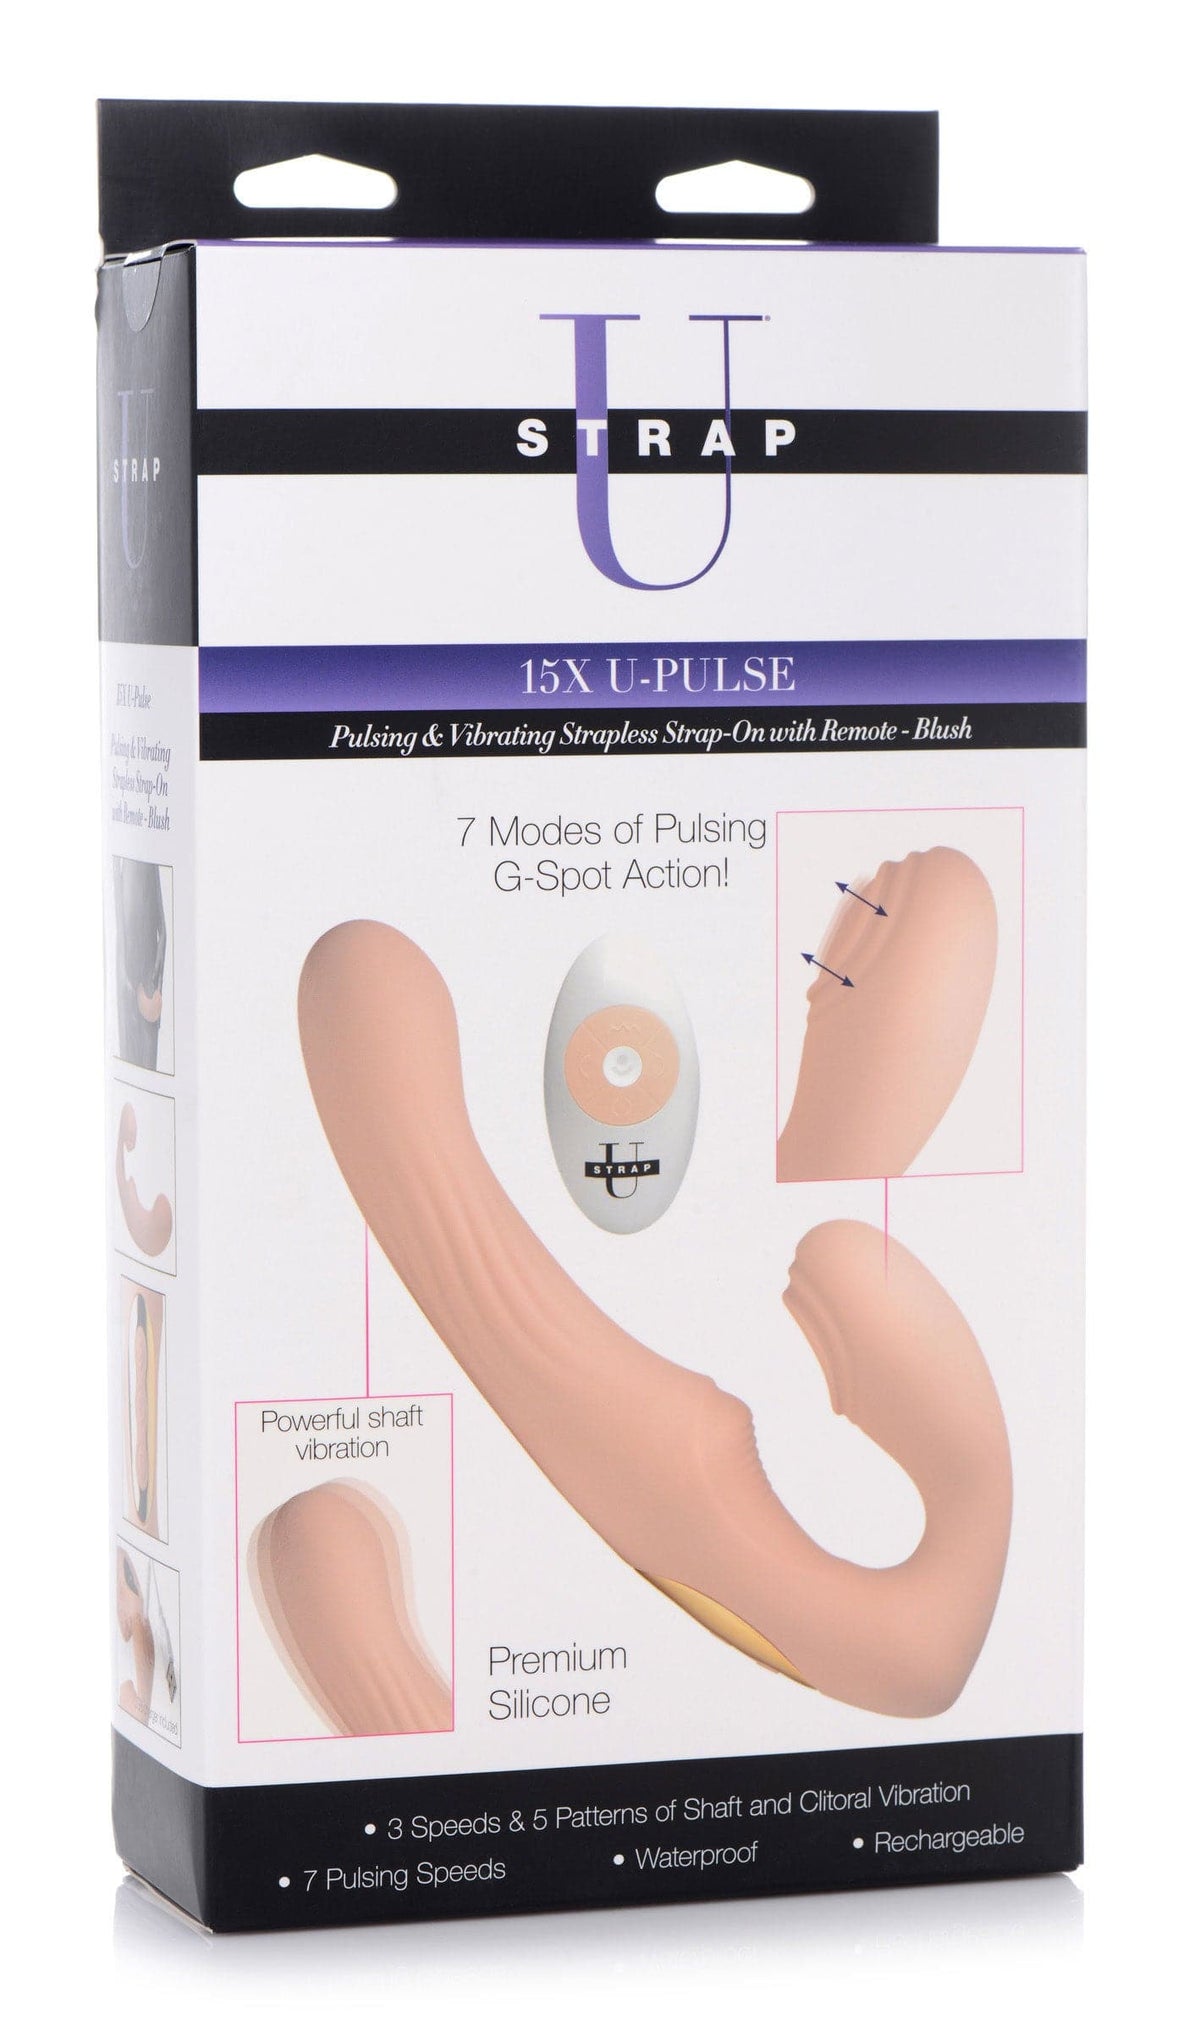 15x u pulse pulse and vibe strapless strap on with remote blush